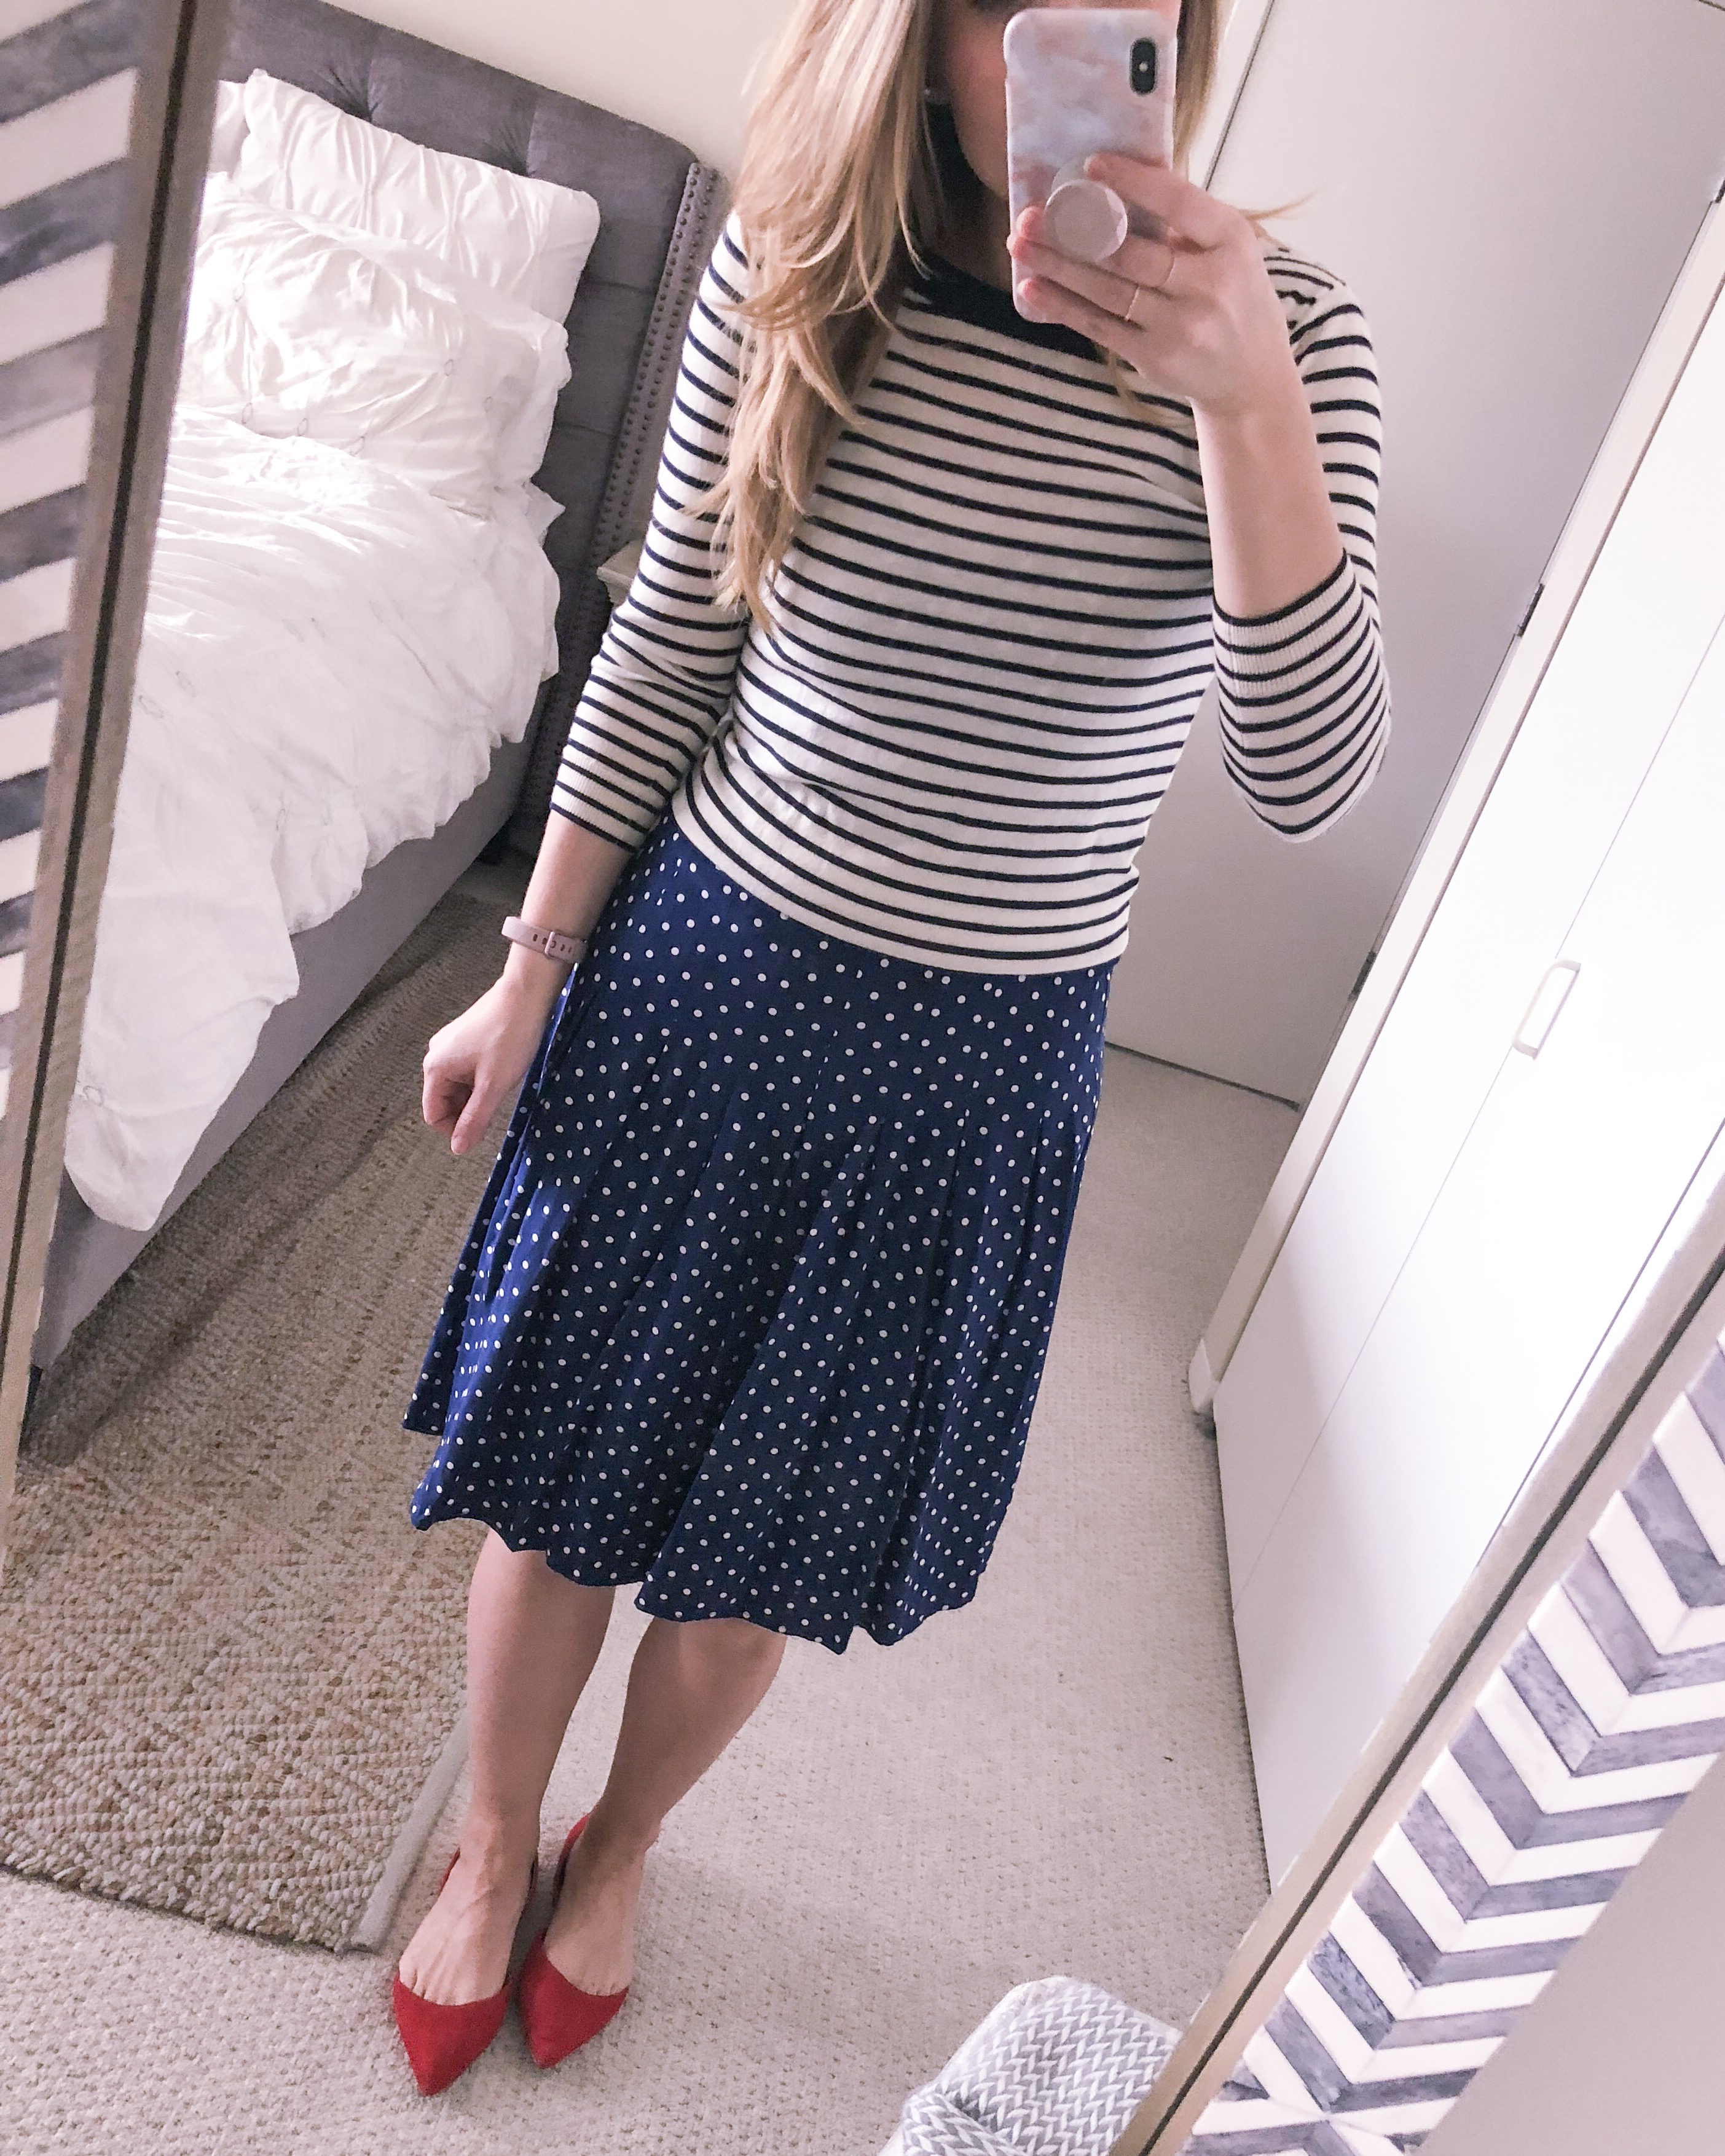 how to style a dress different ways: striped sweater and polka dot dress in navy